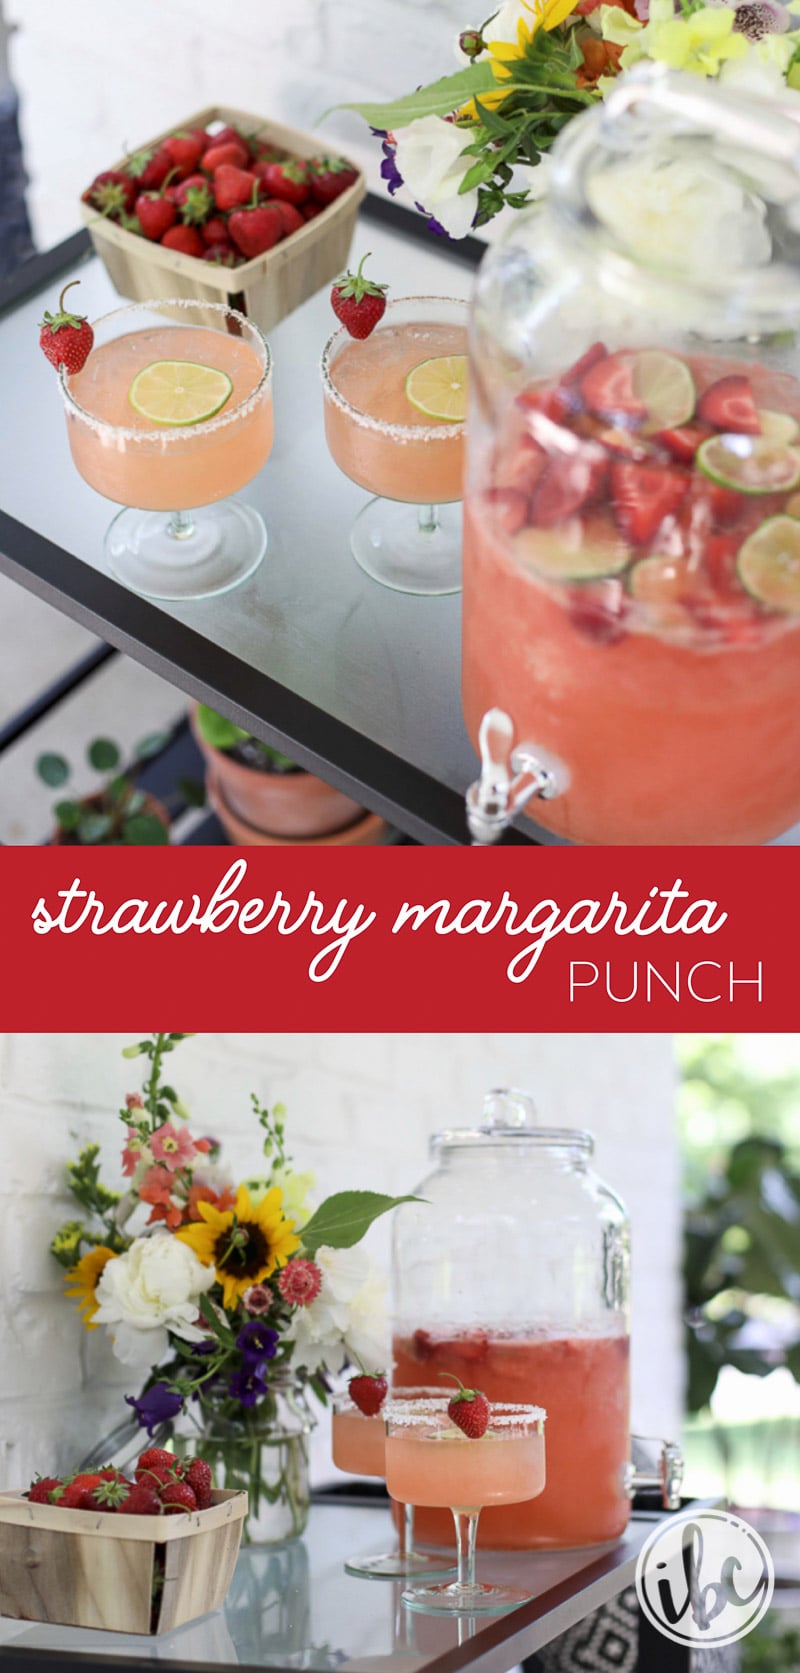 This Strawberry Margarita Punch is the perfect summer cocktail for entertaining. #summer #cocktail #entertaining #margarita #recipe